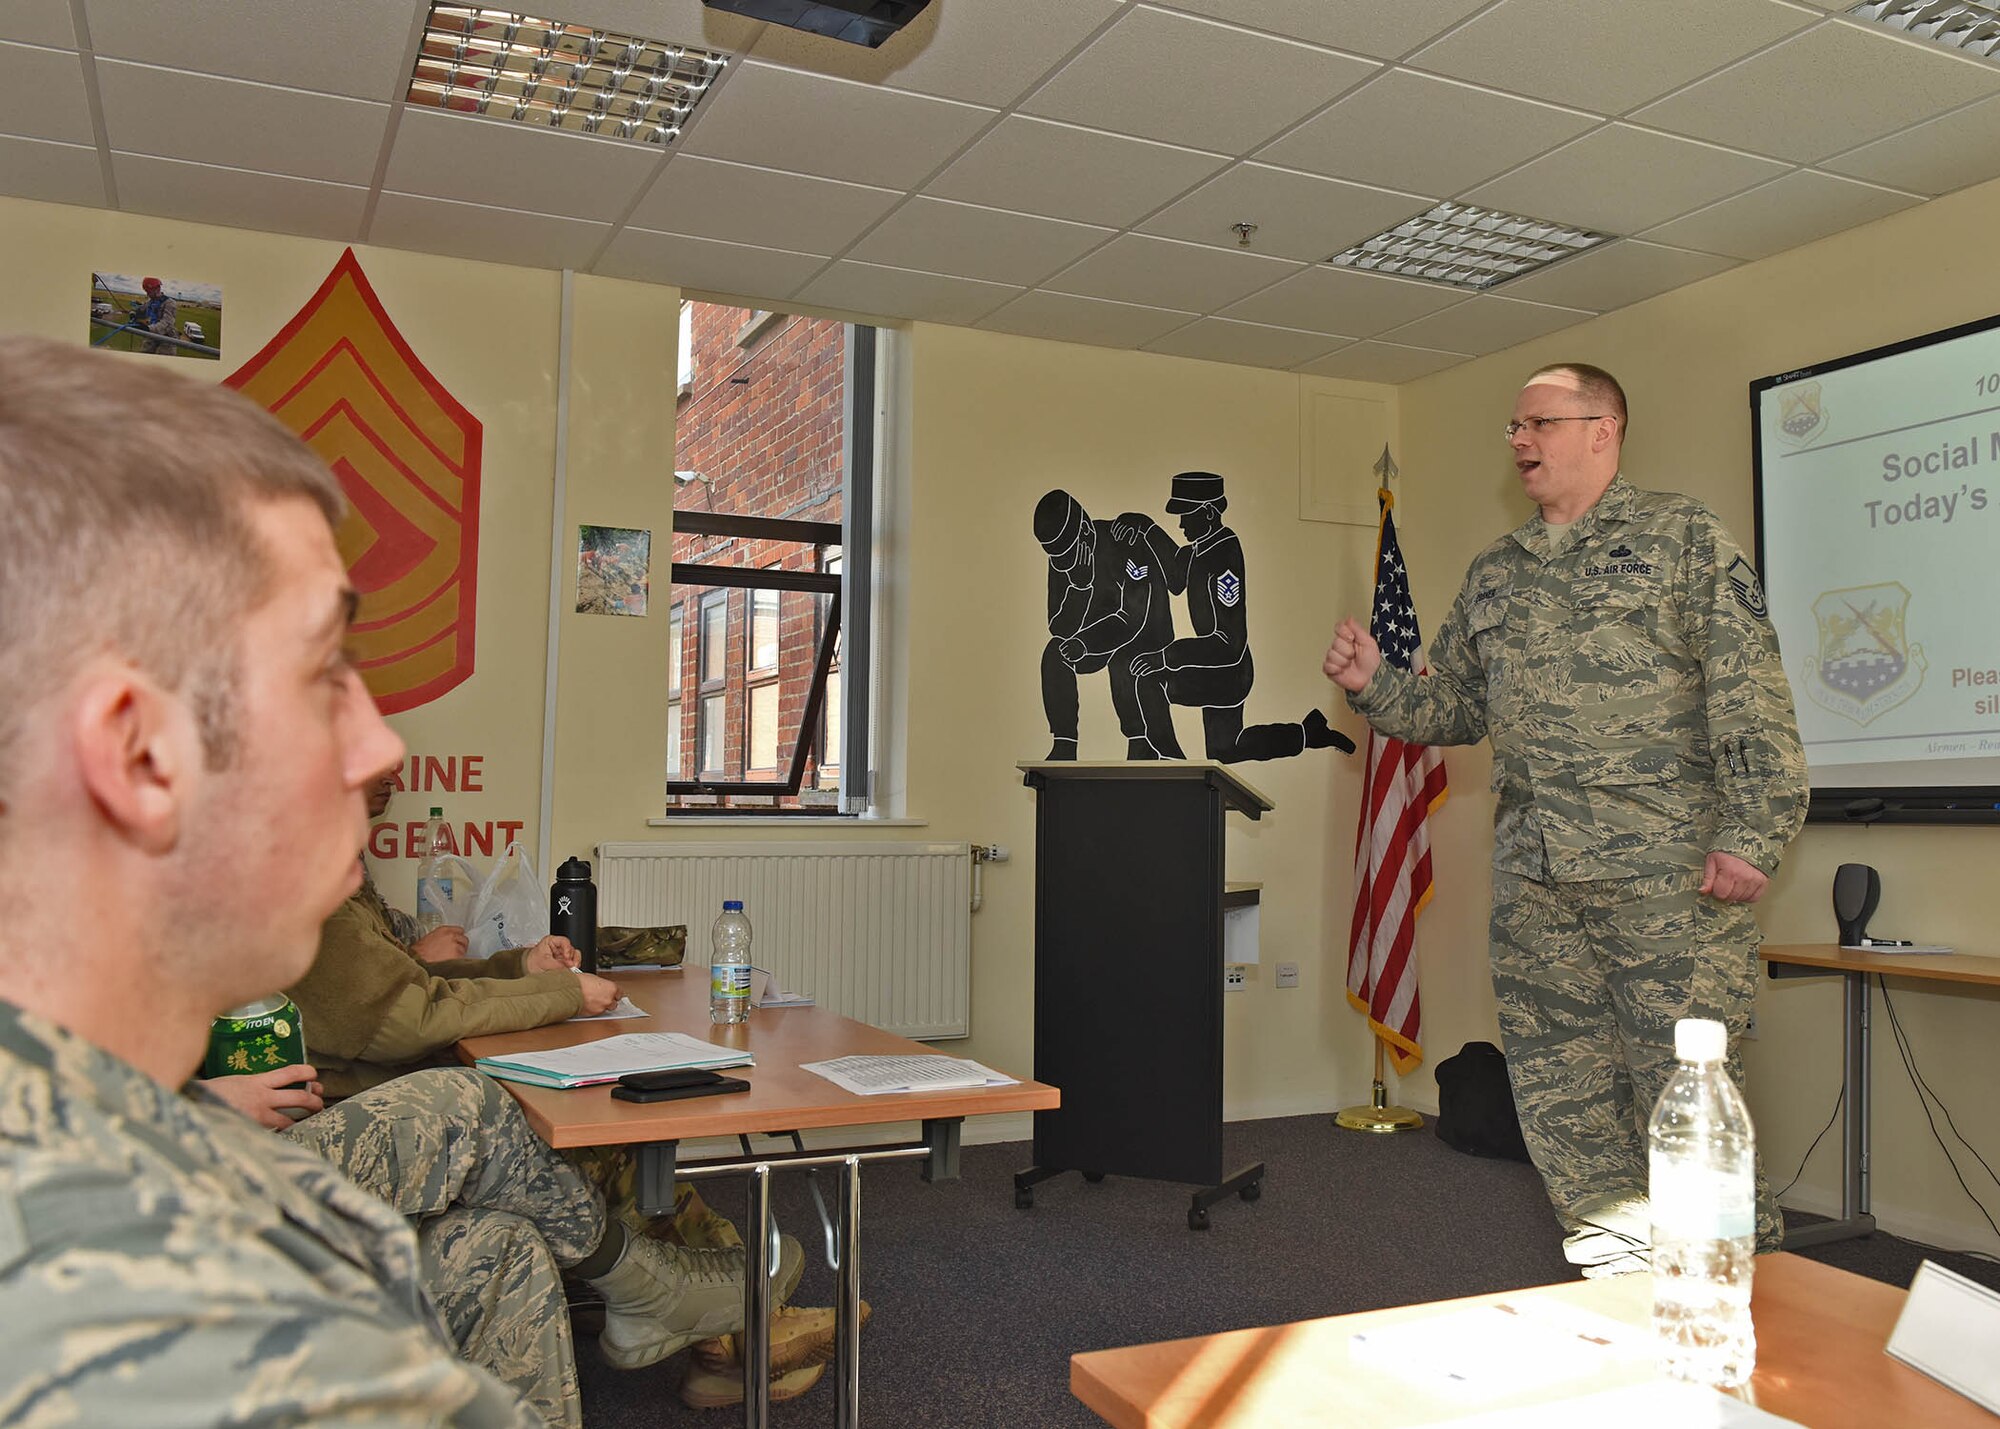 U.S. Air Force Master Sgt. Andrew Cosner, 100th Air Refueling Wing plans and program manager, speaks to a class of junior enlisted Airmen during an Airmen Enhancement Seminar at RAF Mildenhall, England, Feb. 27, 2019. This was the first time this course was held at RAF Mildenhall and included 25 Airmen from the base. (U.S. Air Force photo by Senior Airman Luke Milano)